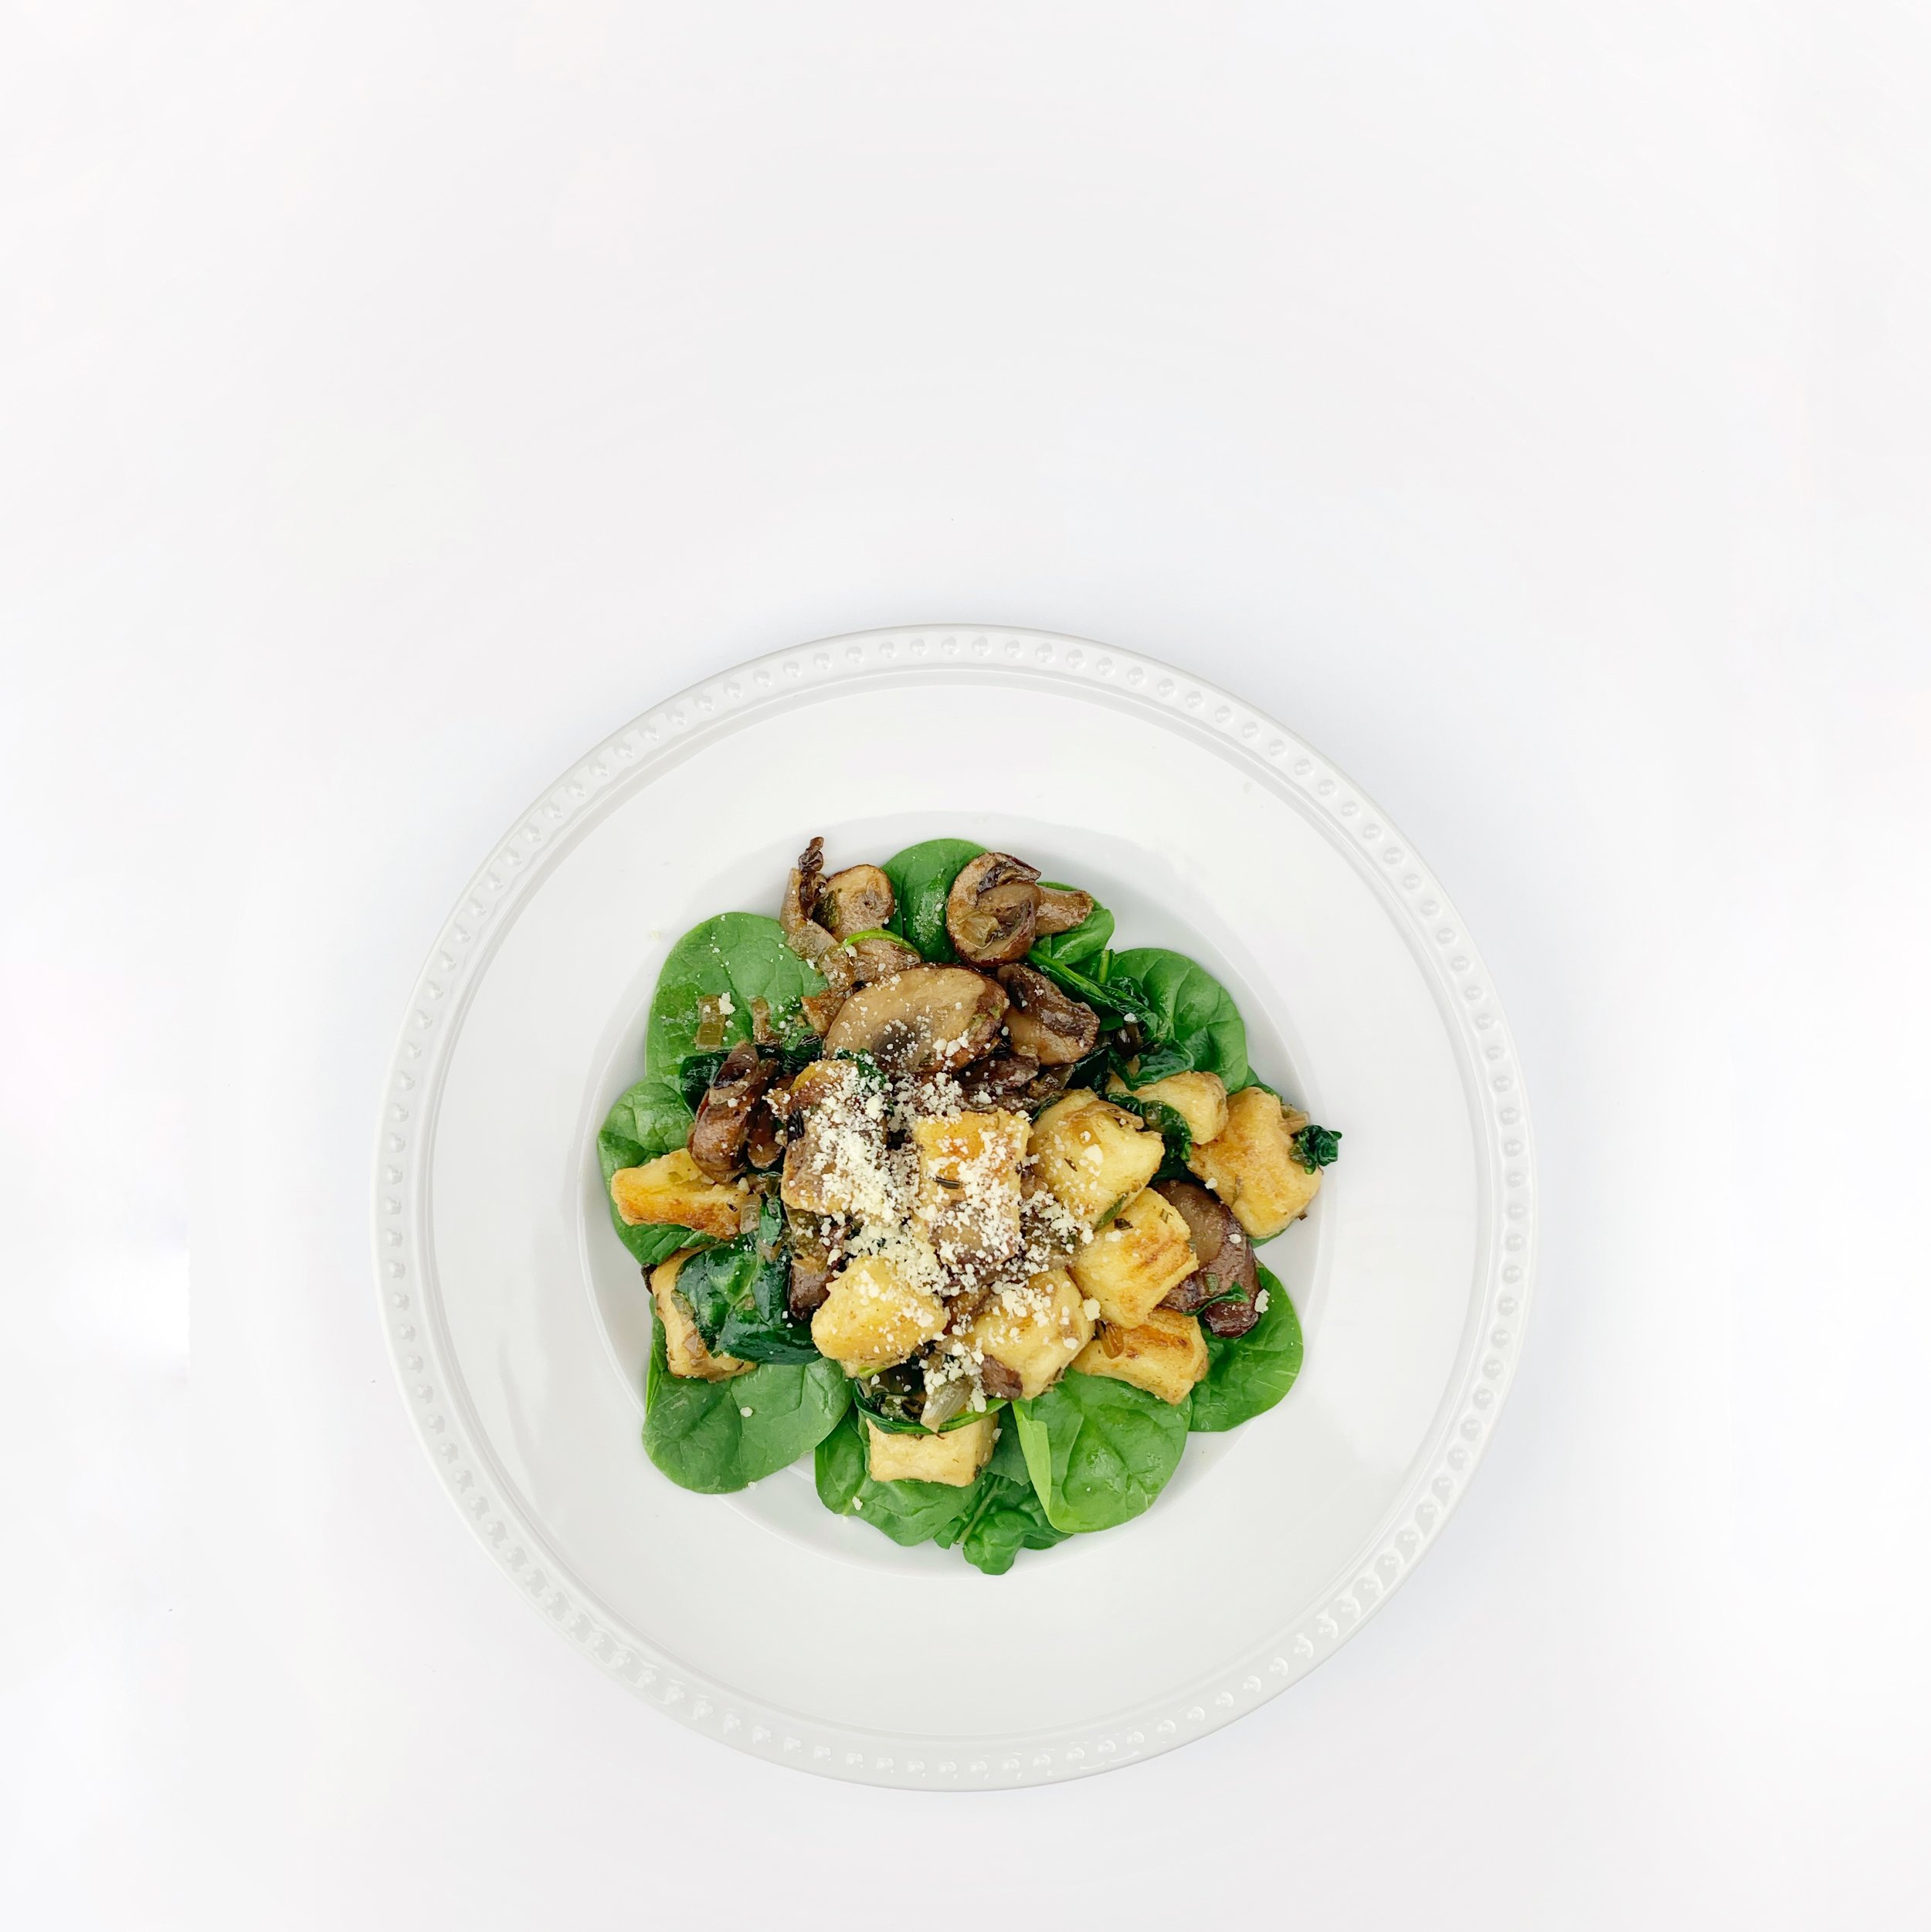 Almond Gnocchi Salad with Mushrooms and Spinach